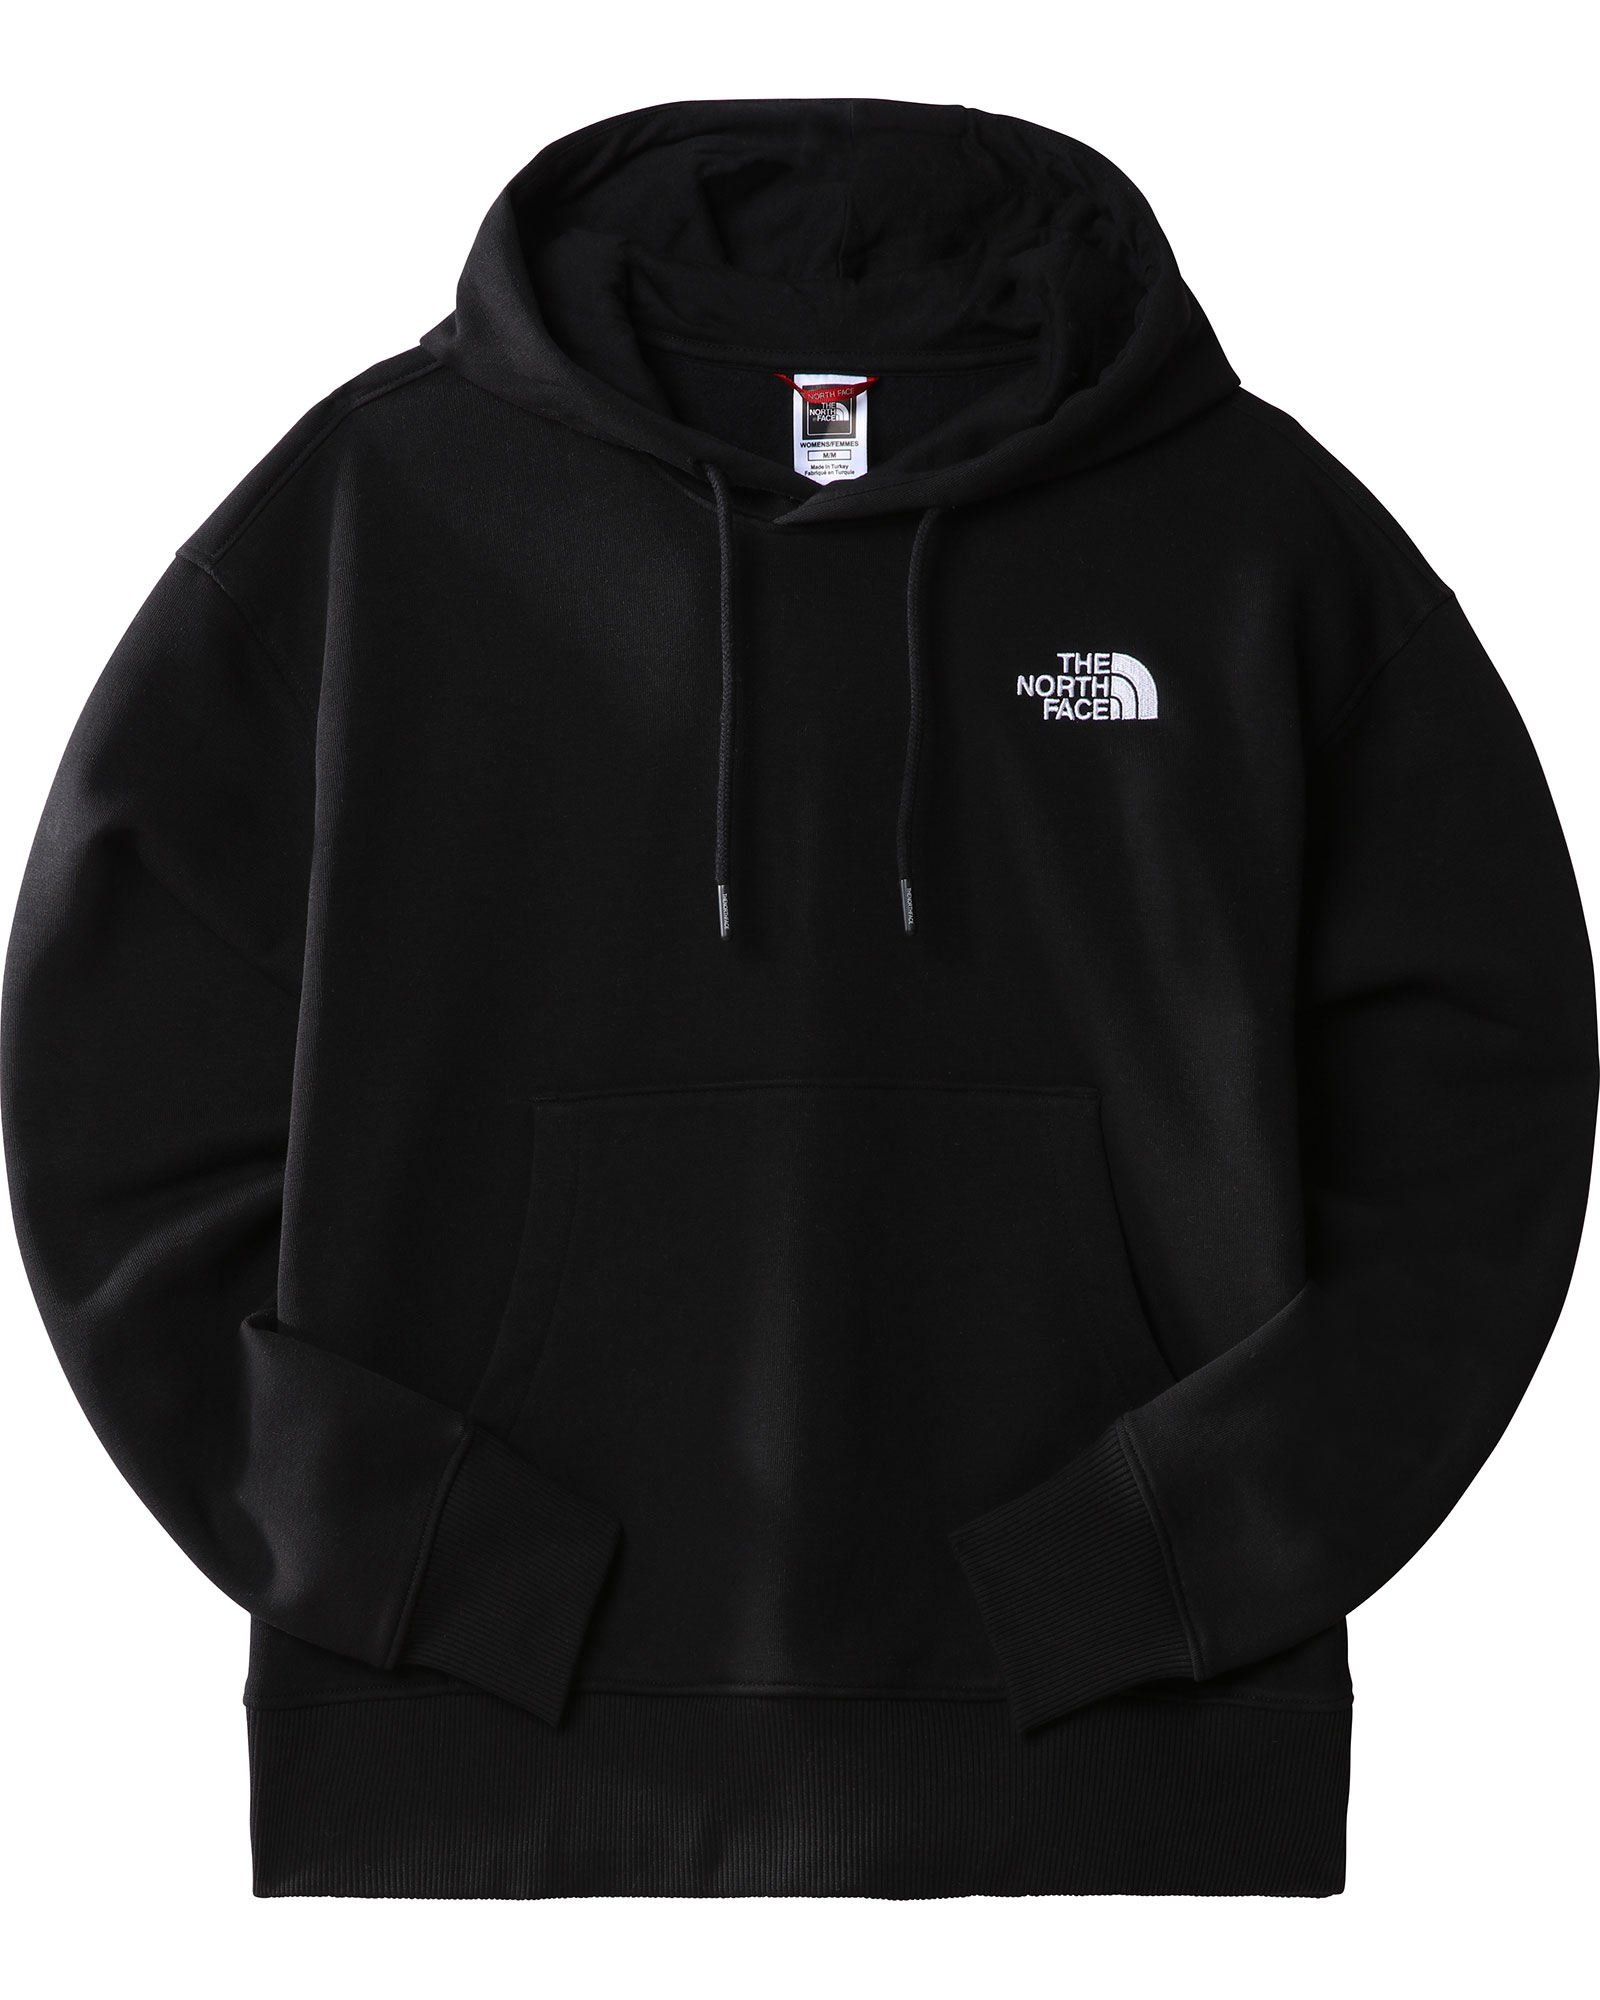 The North Face Women’s Essential Hoodie - TNF Black XL